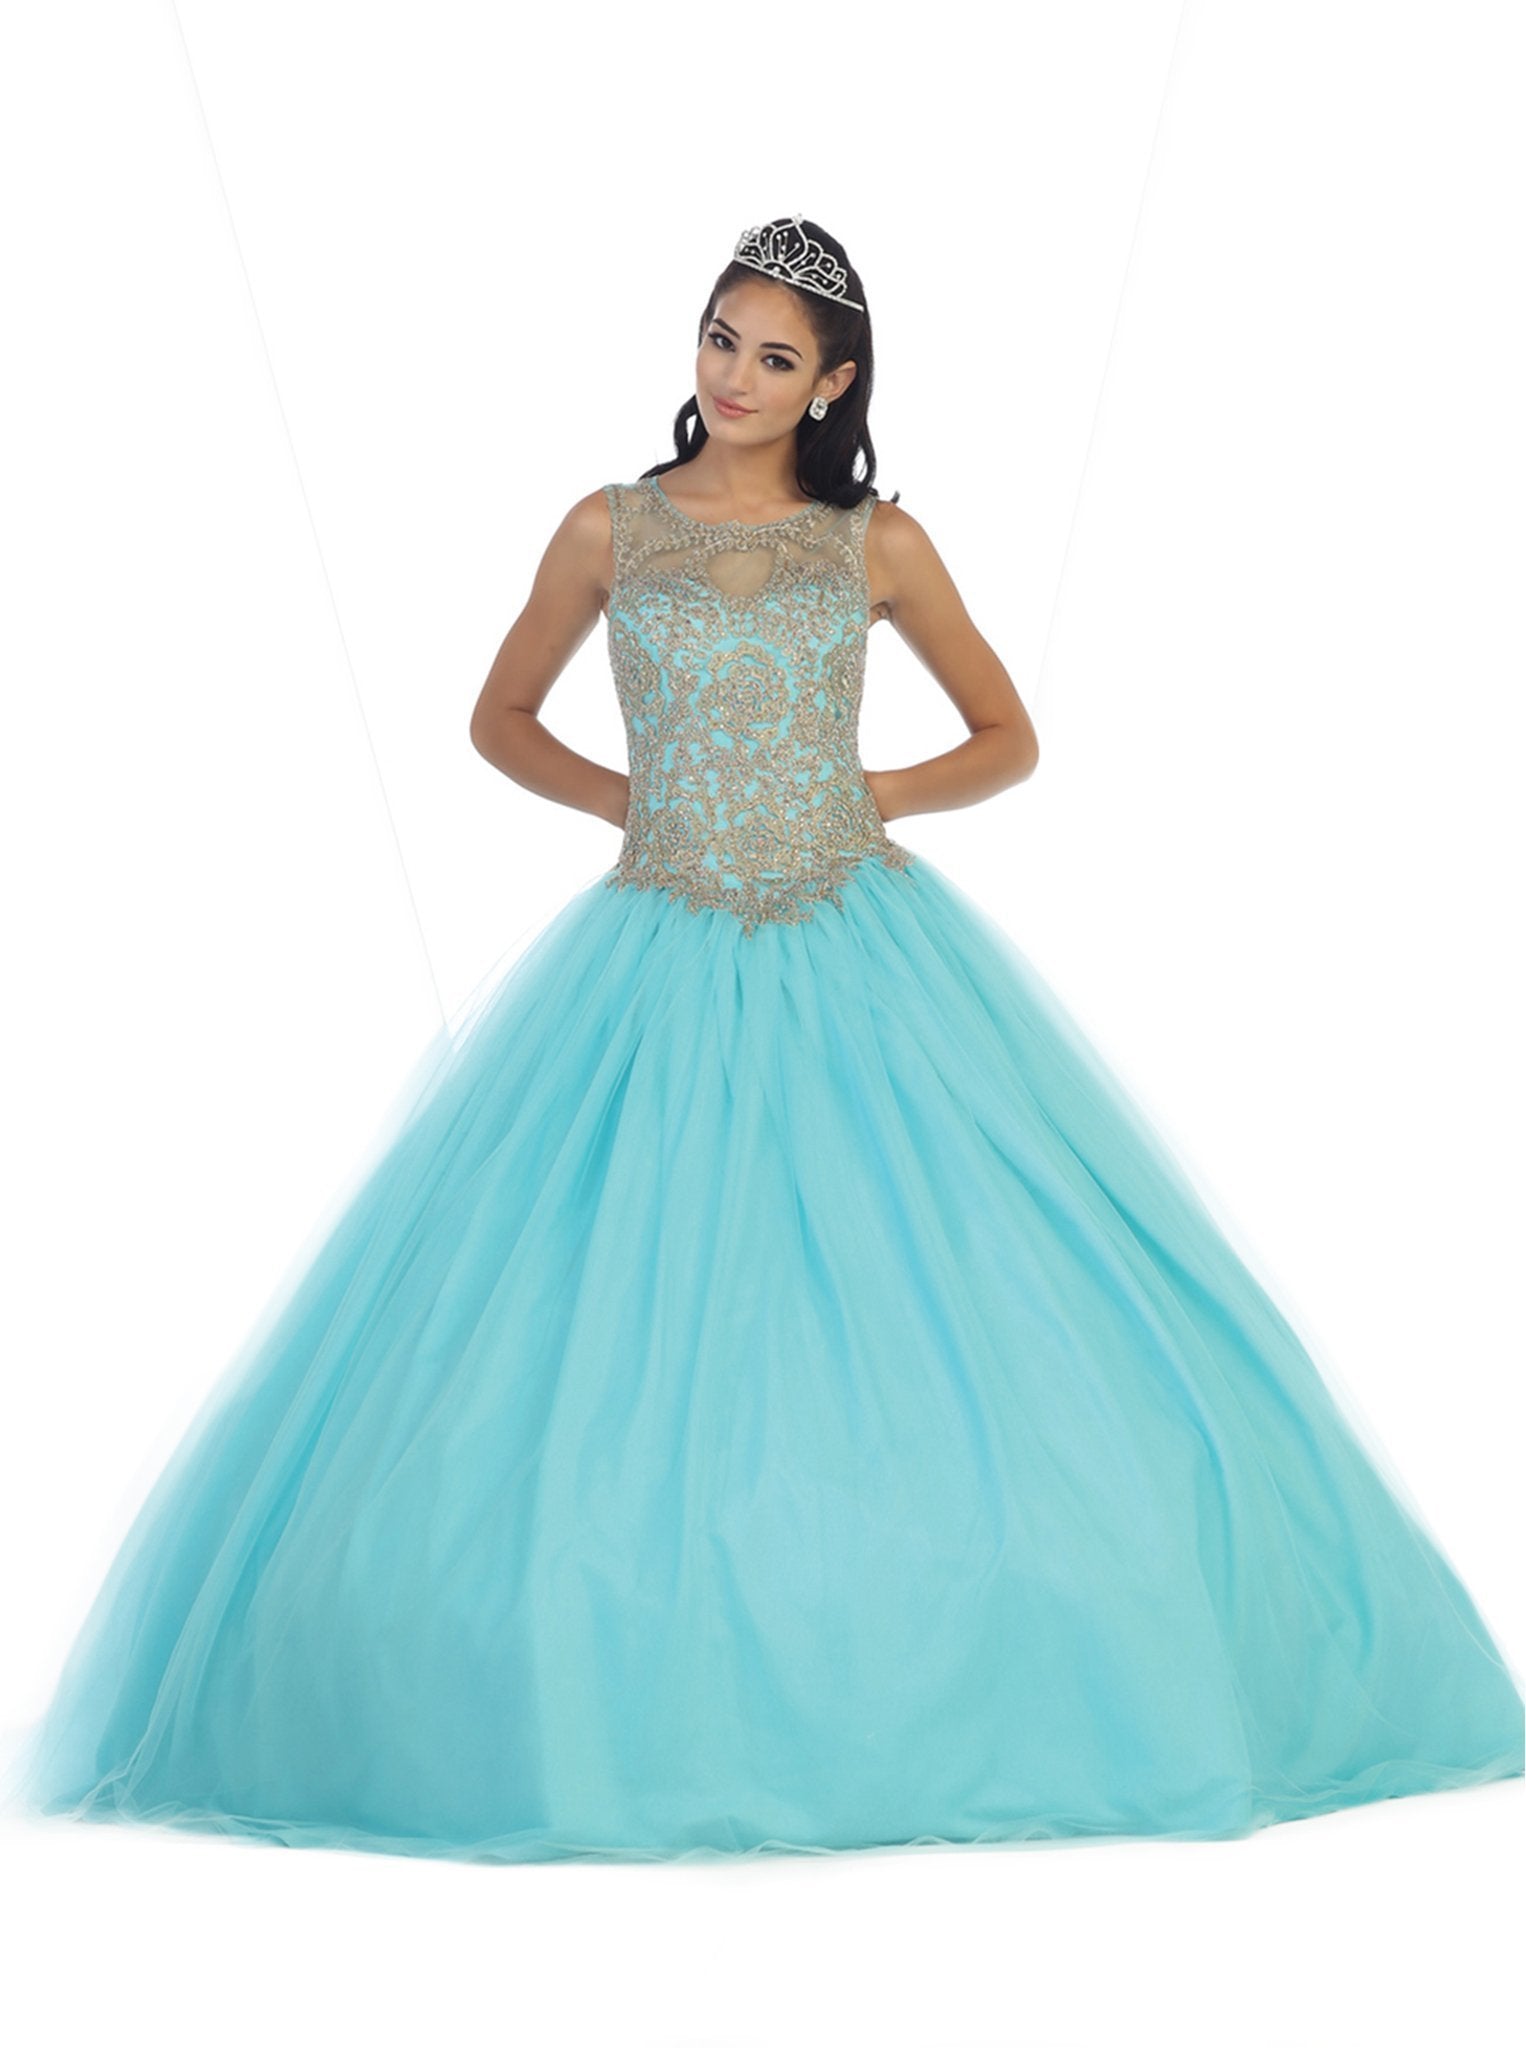 May Queen - LK-72 Lace Illusion Jewel Evening Gown